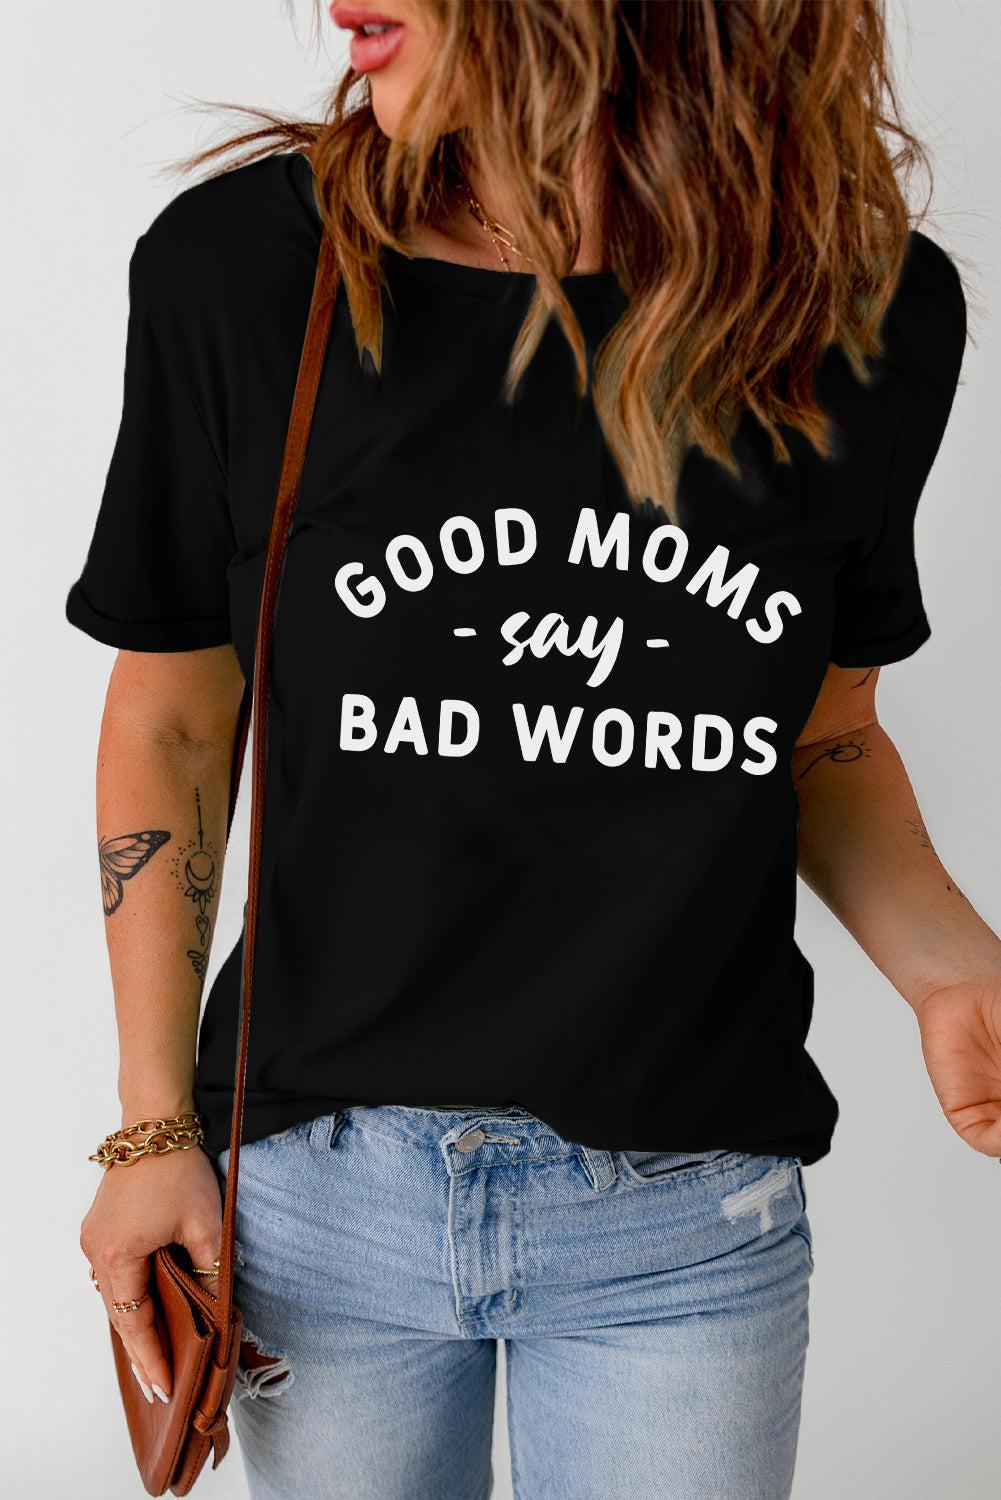 GOOD MOMS SAY BAD WORDS Graphic Tee BLUE ZONE PLANET